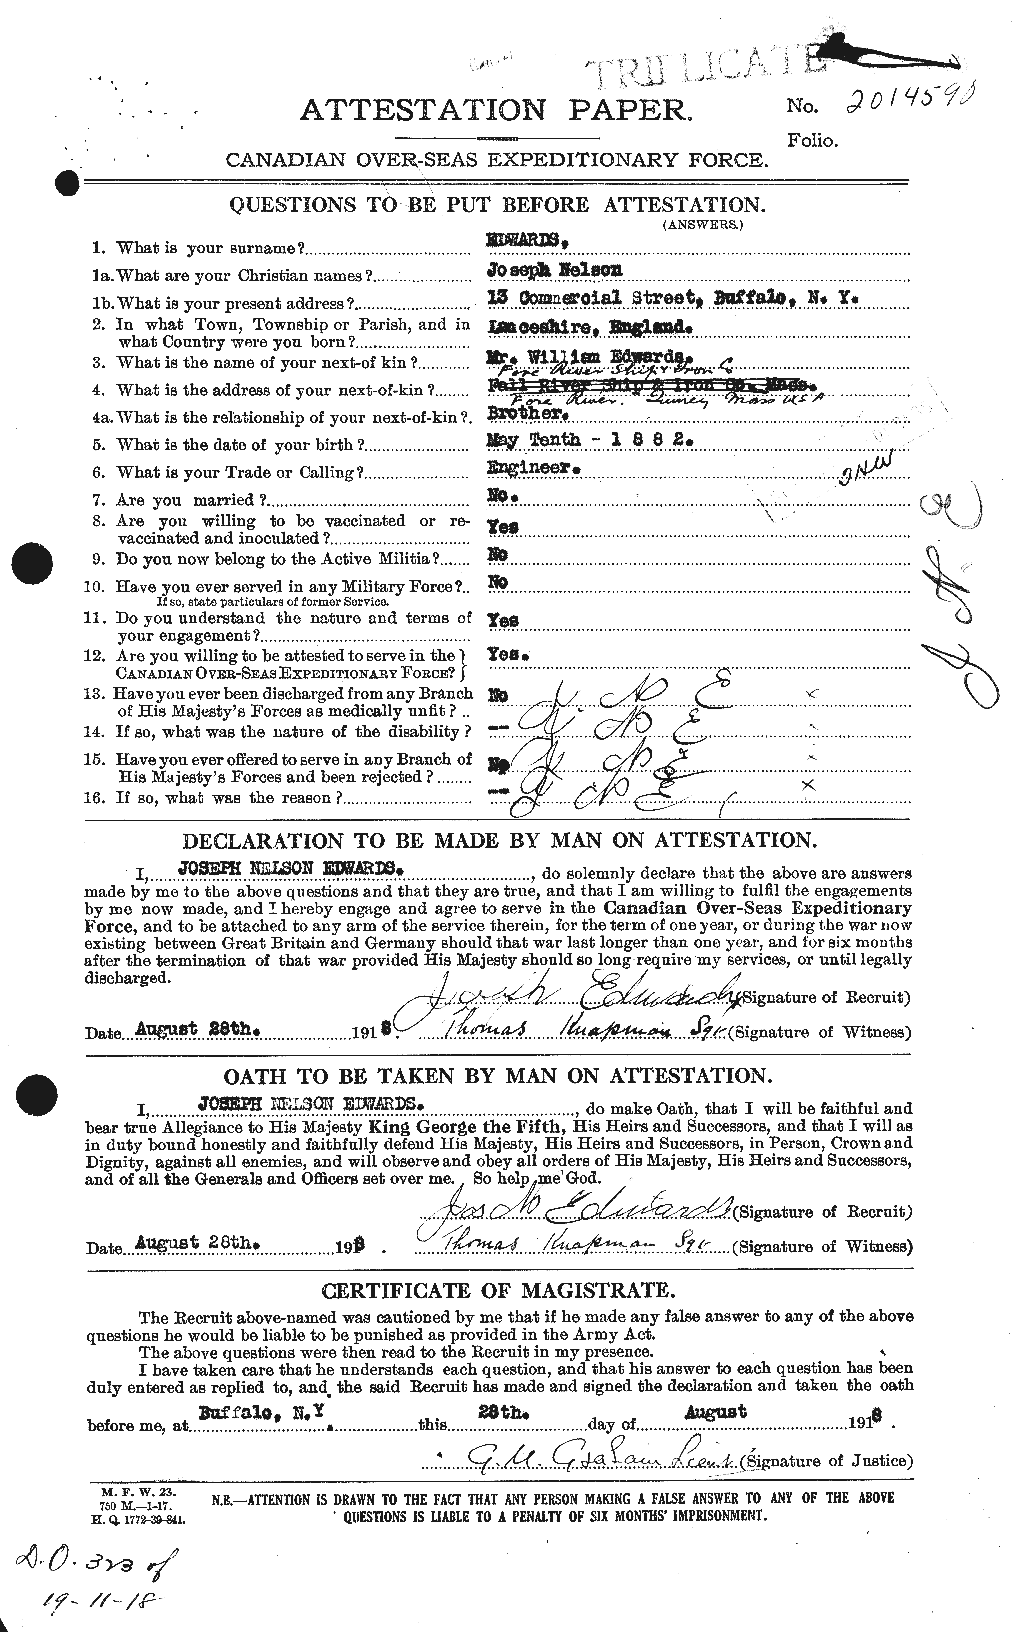 Personnel Records of the First World War - CEF 310184a